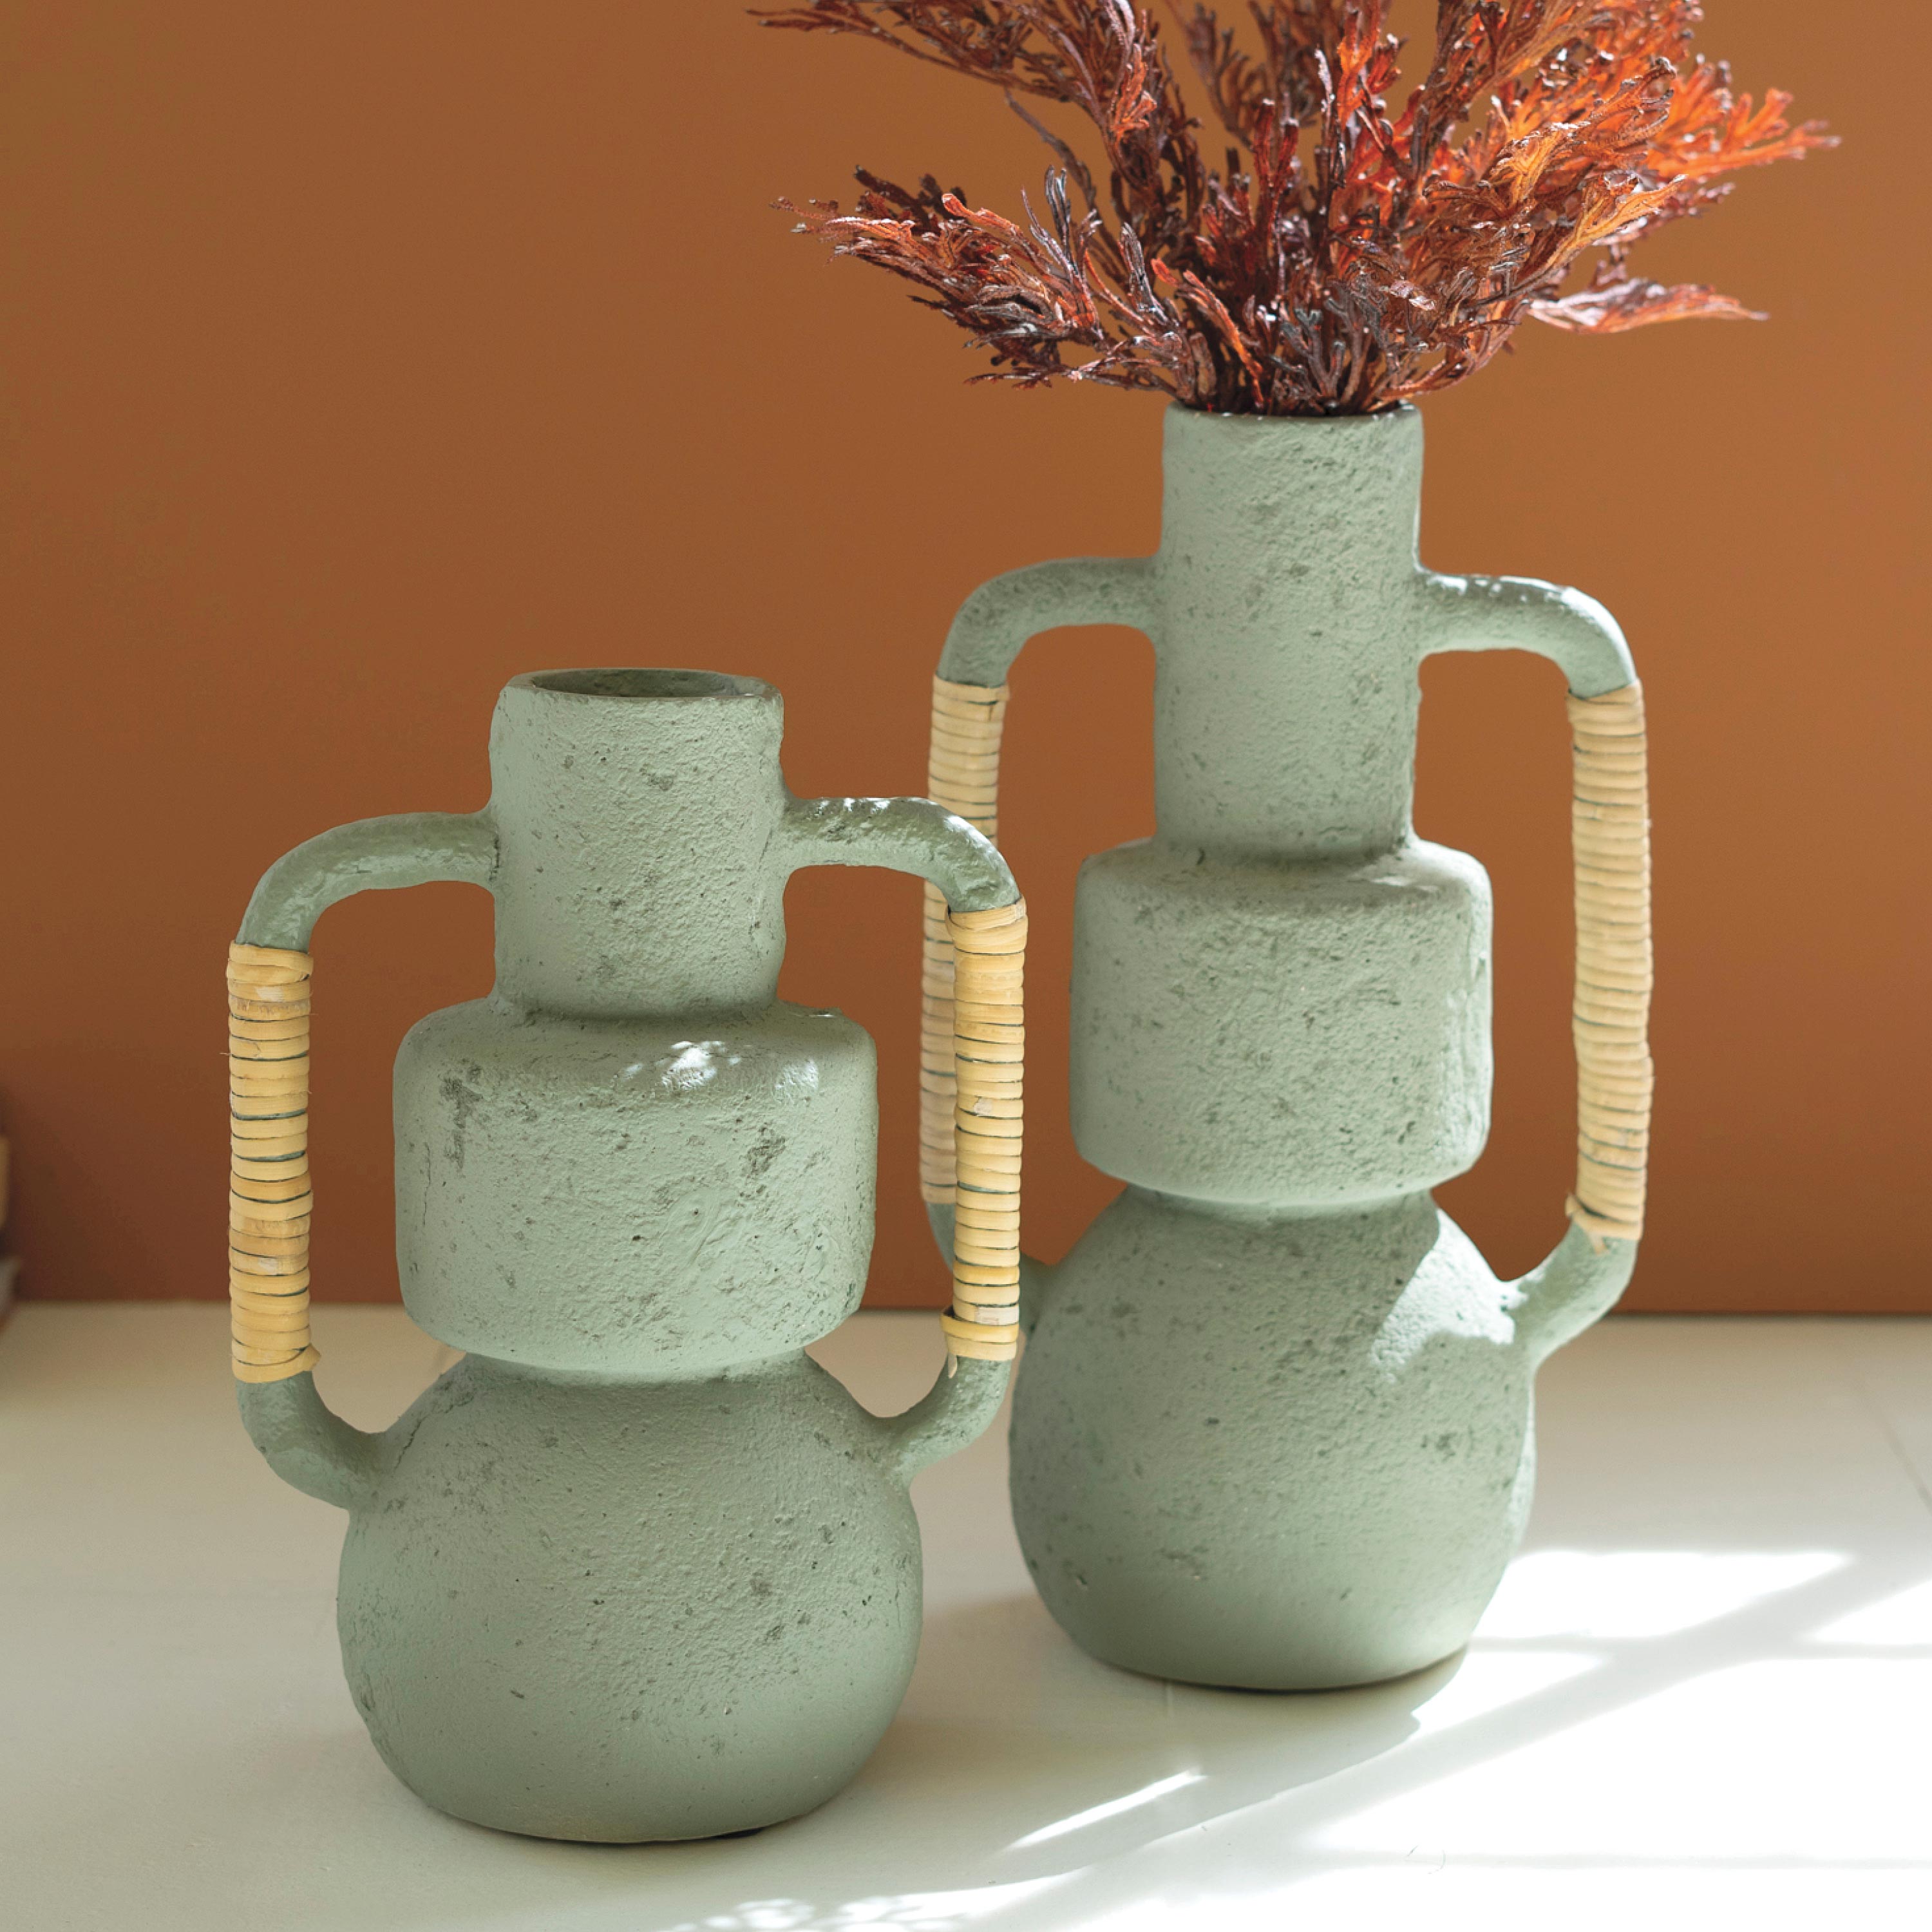 Paper Mache Vases with Cane Wrapped Handles